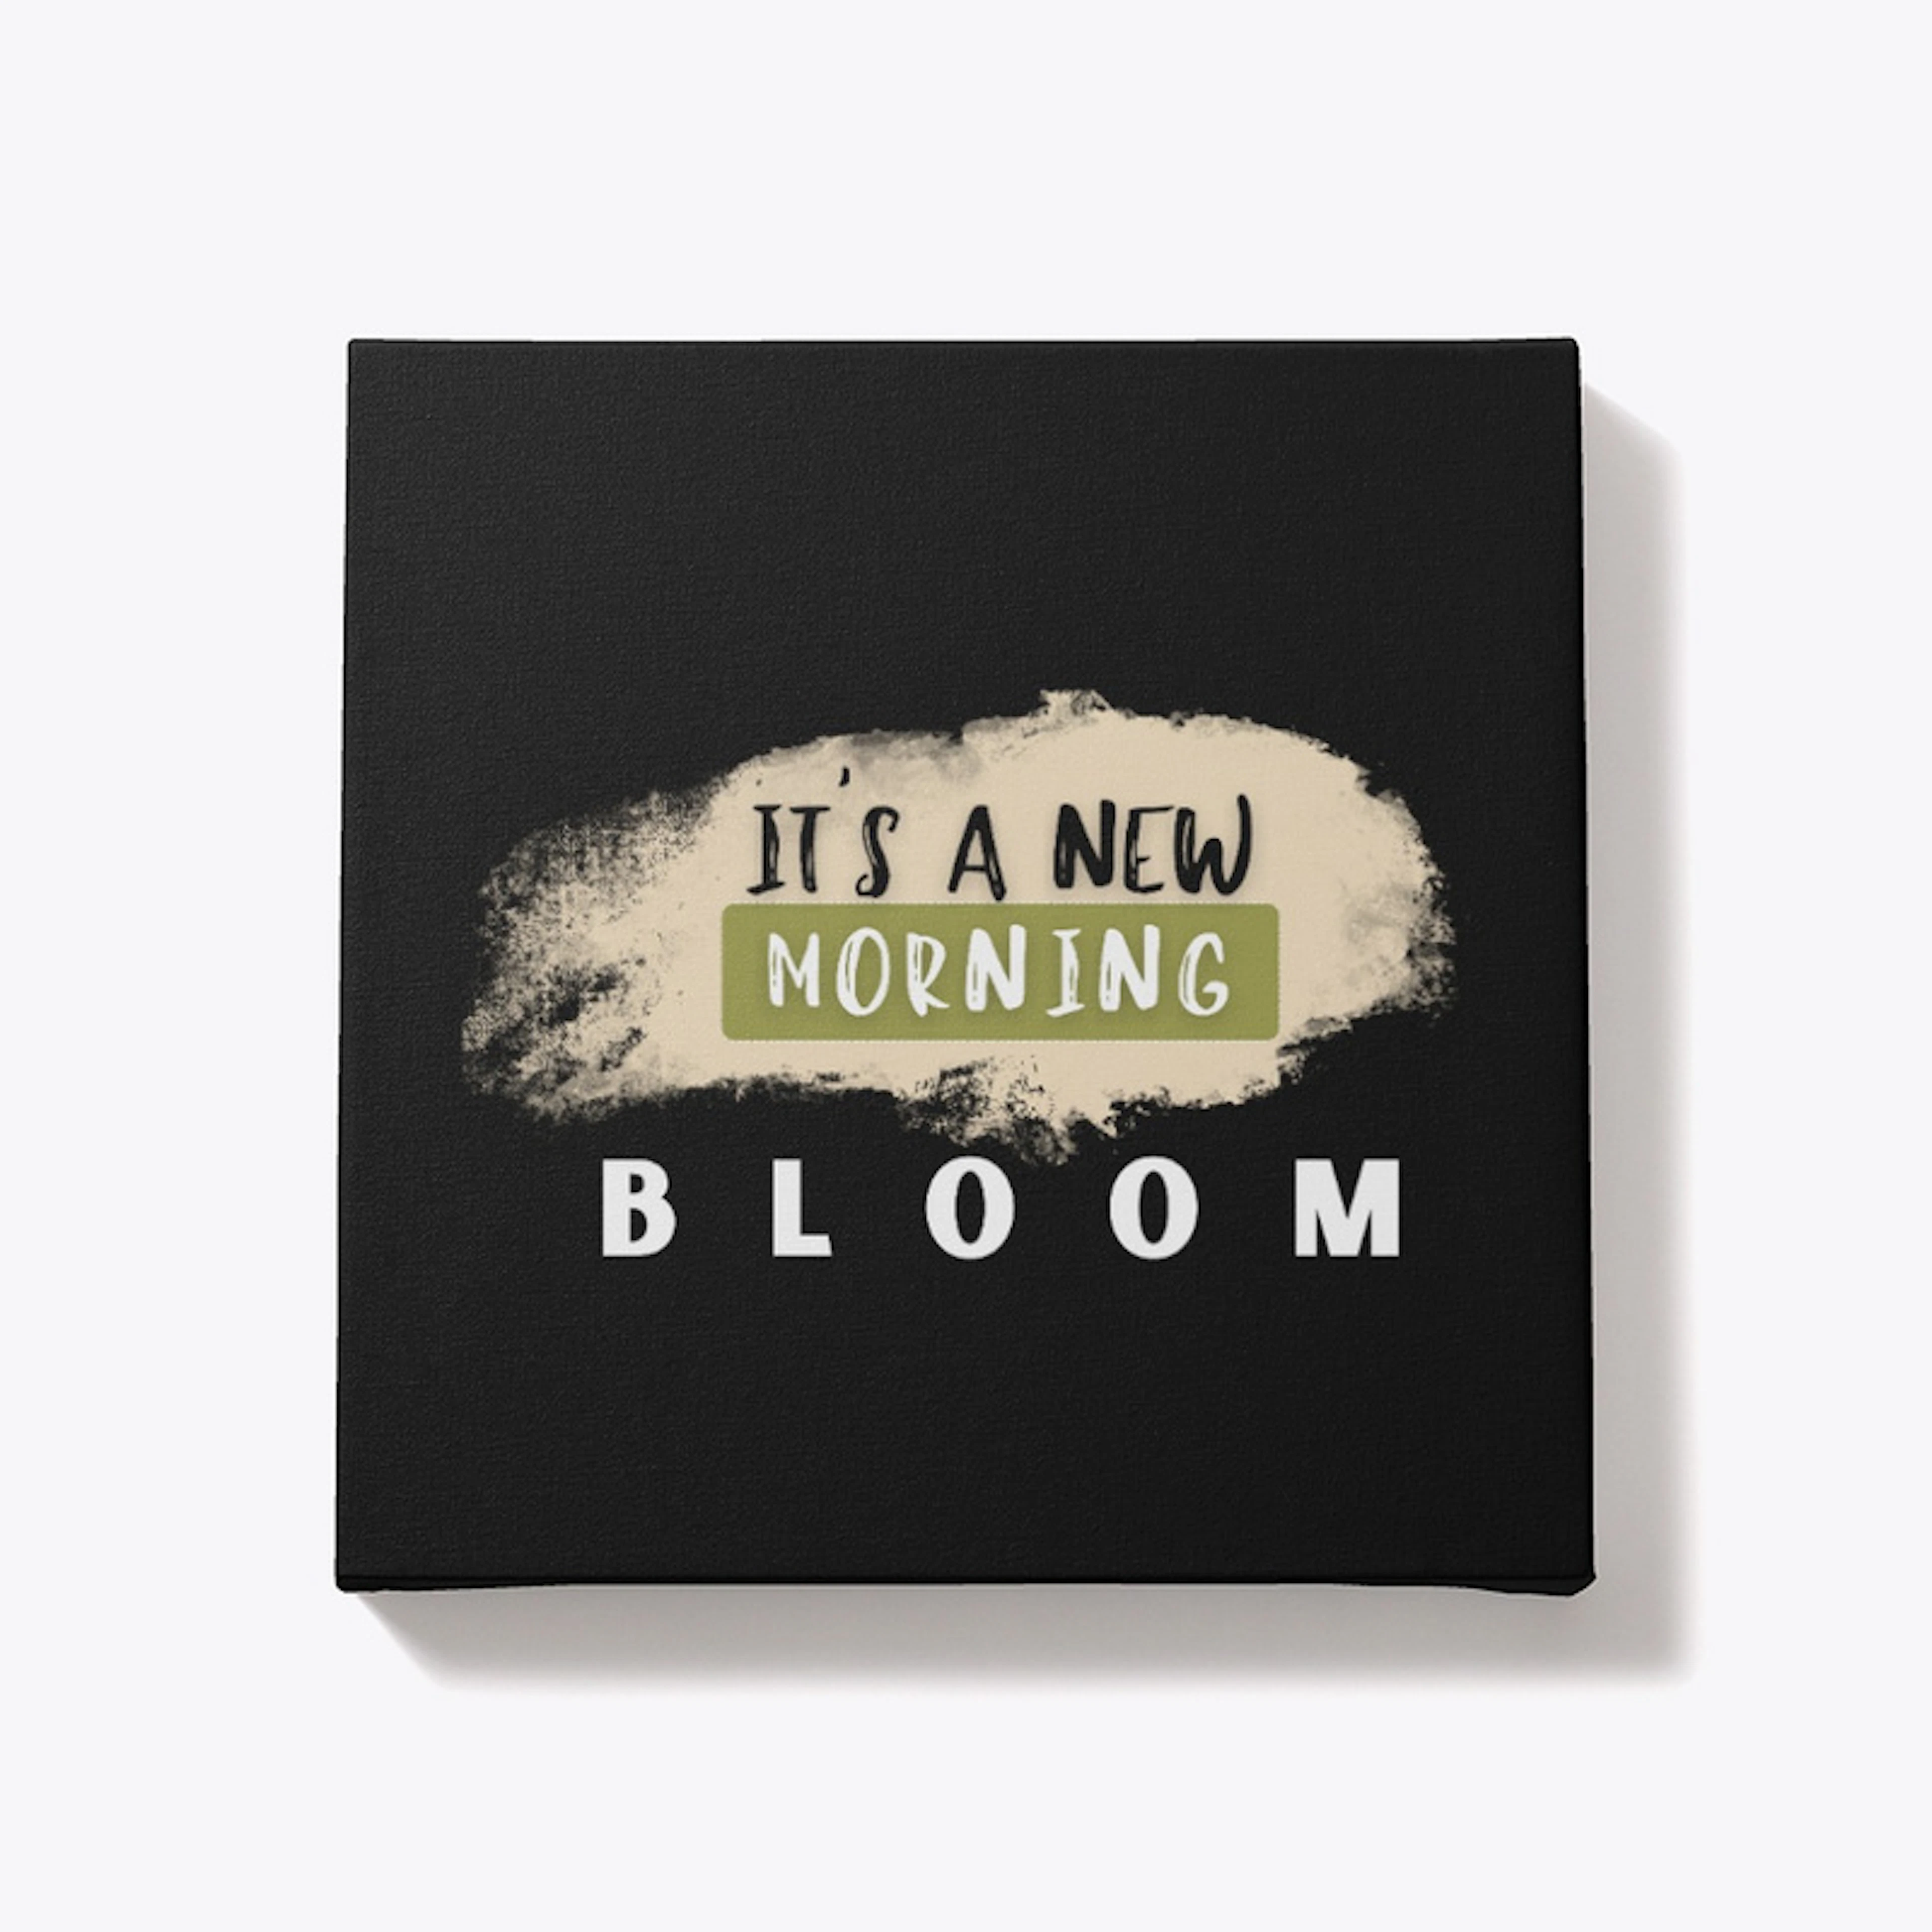 Bloom (It's A New Morning)